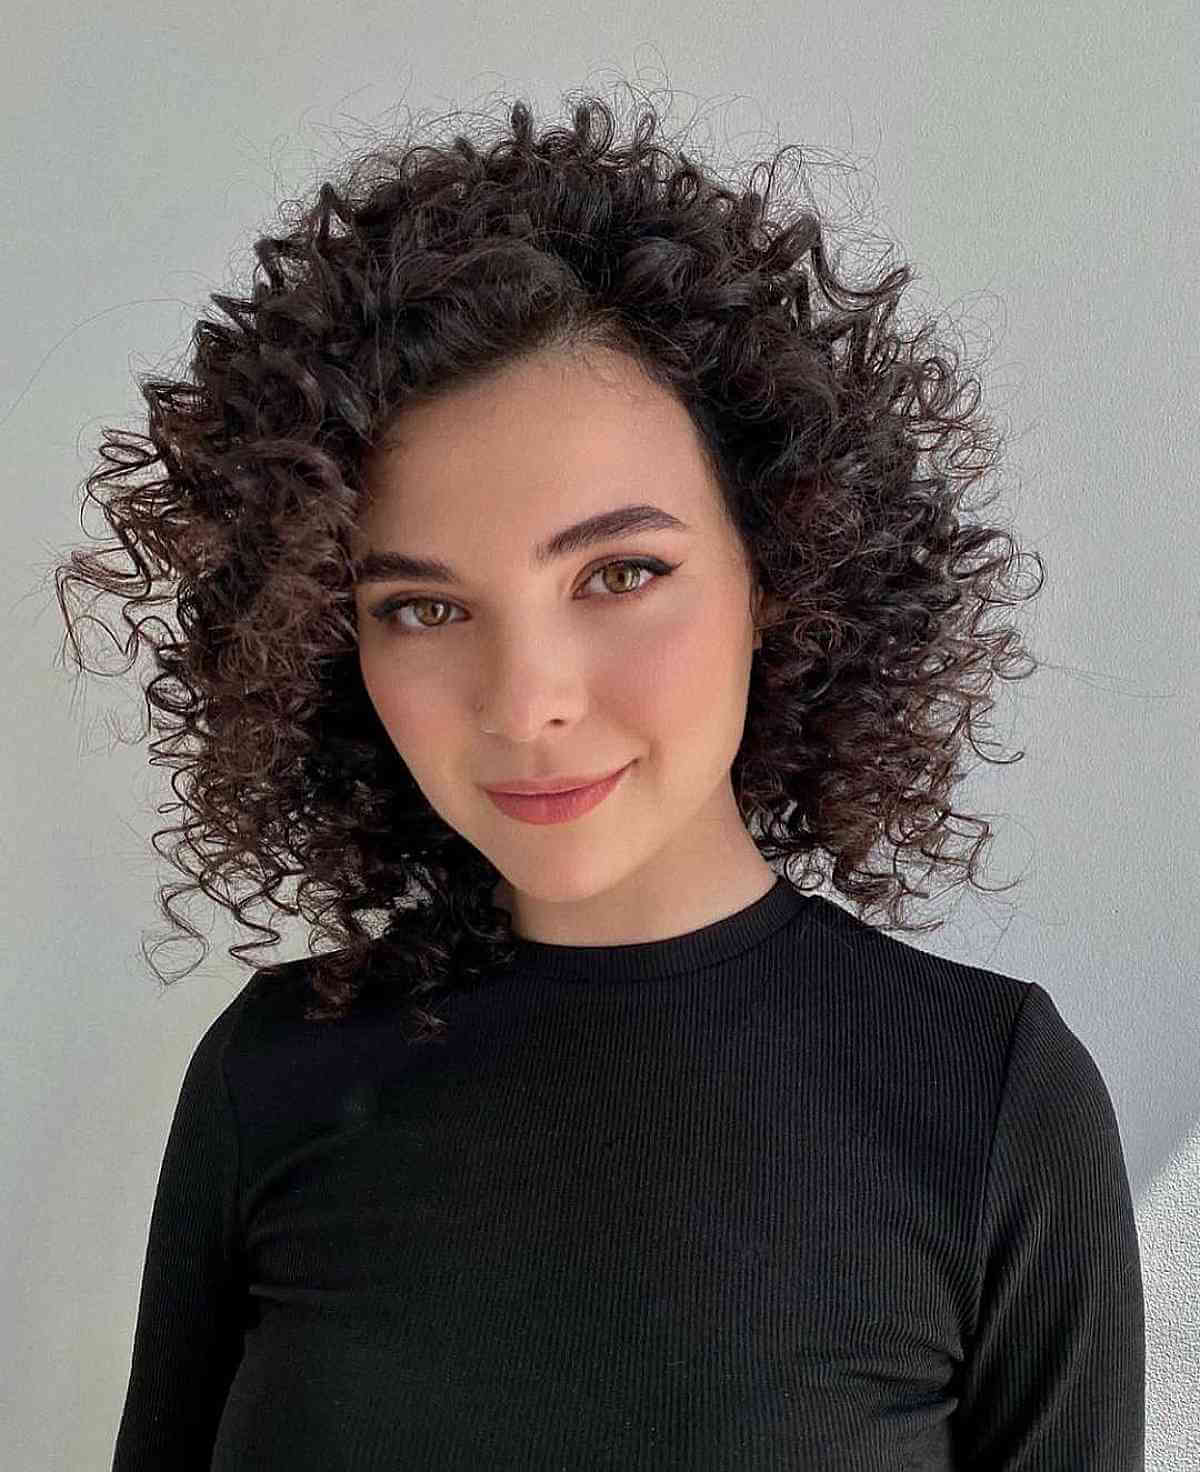 Remarkable Frizzy Curls on a Bob Cut